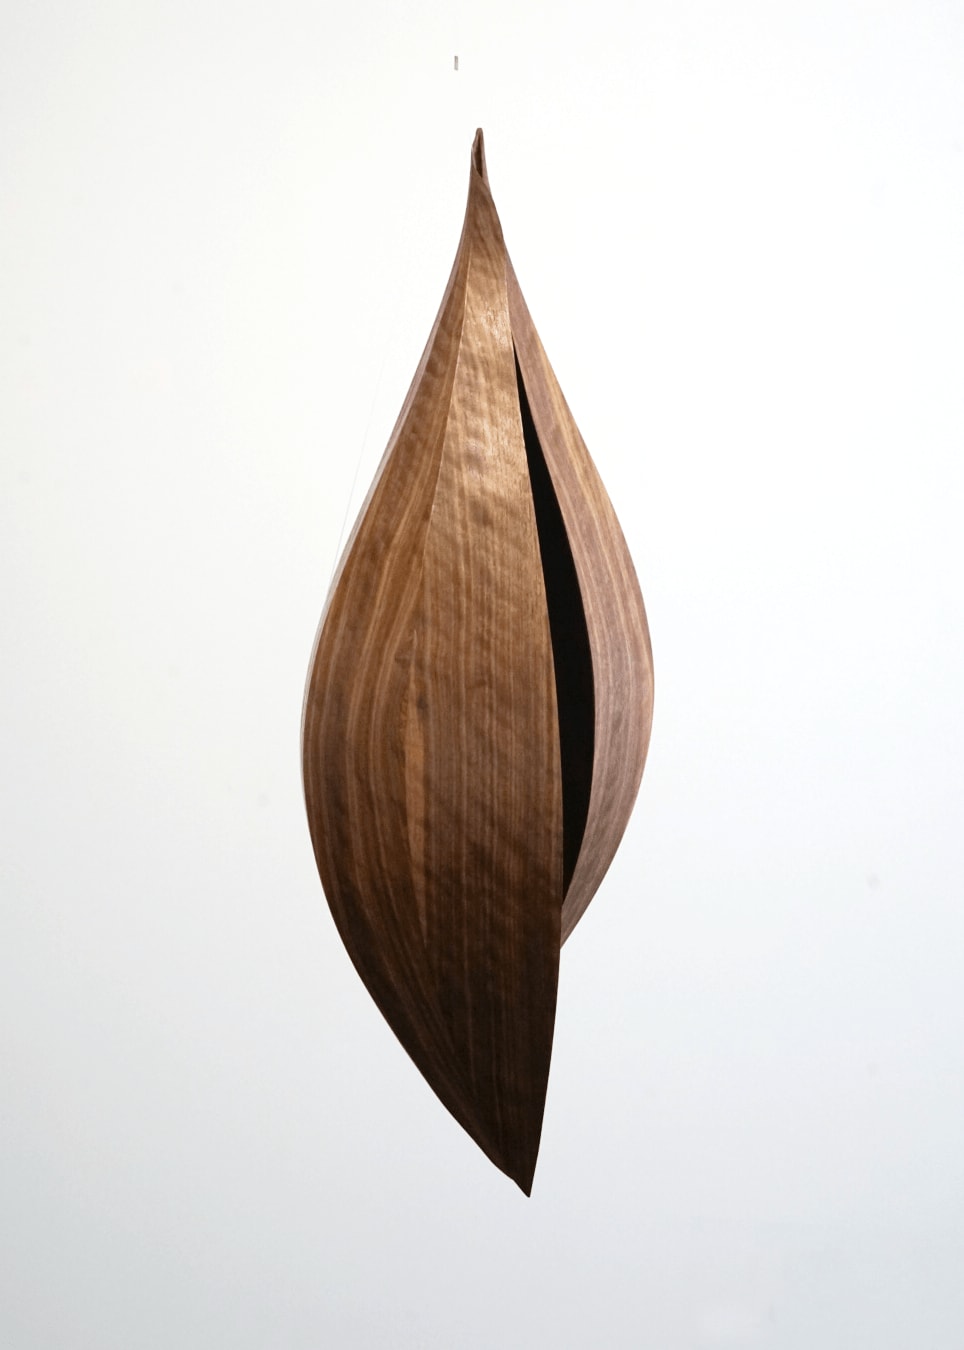 Alison Croney Moses, Walnut Shell Two, 2023